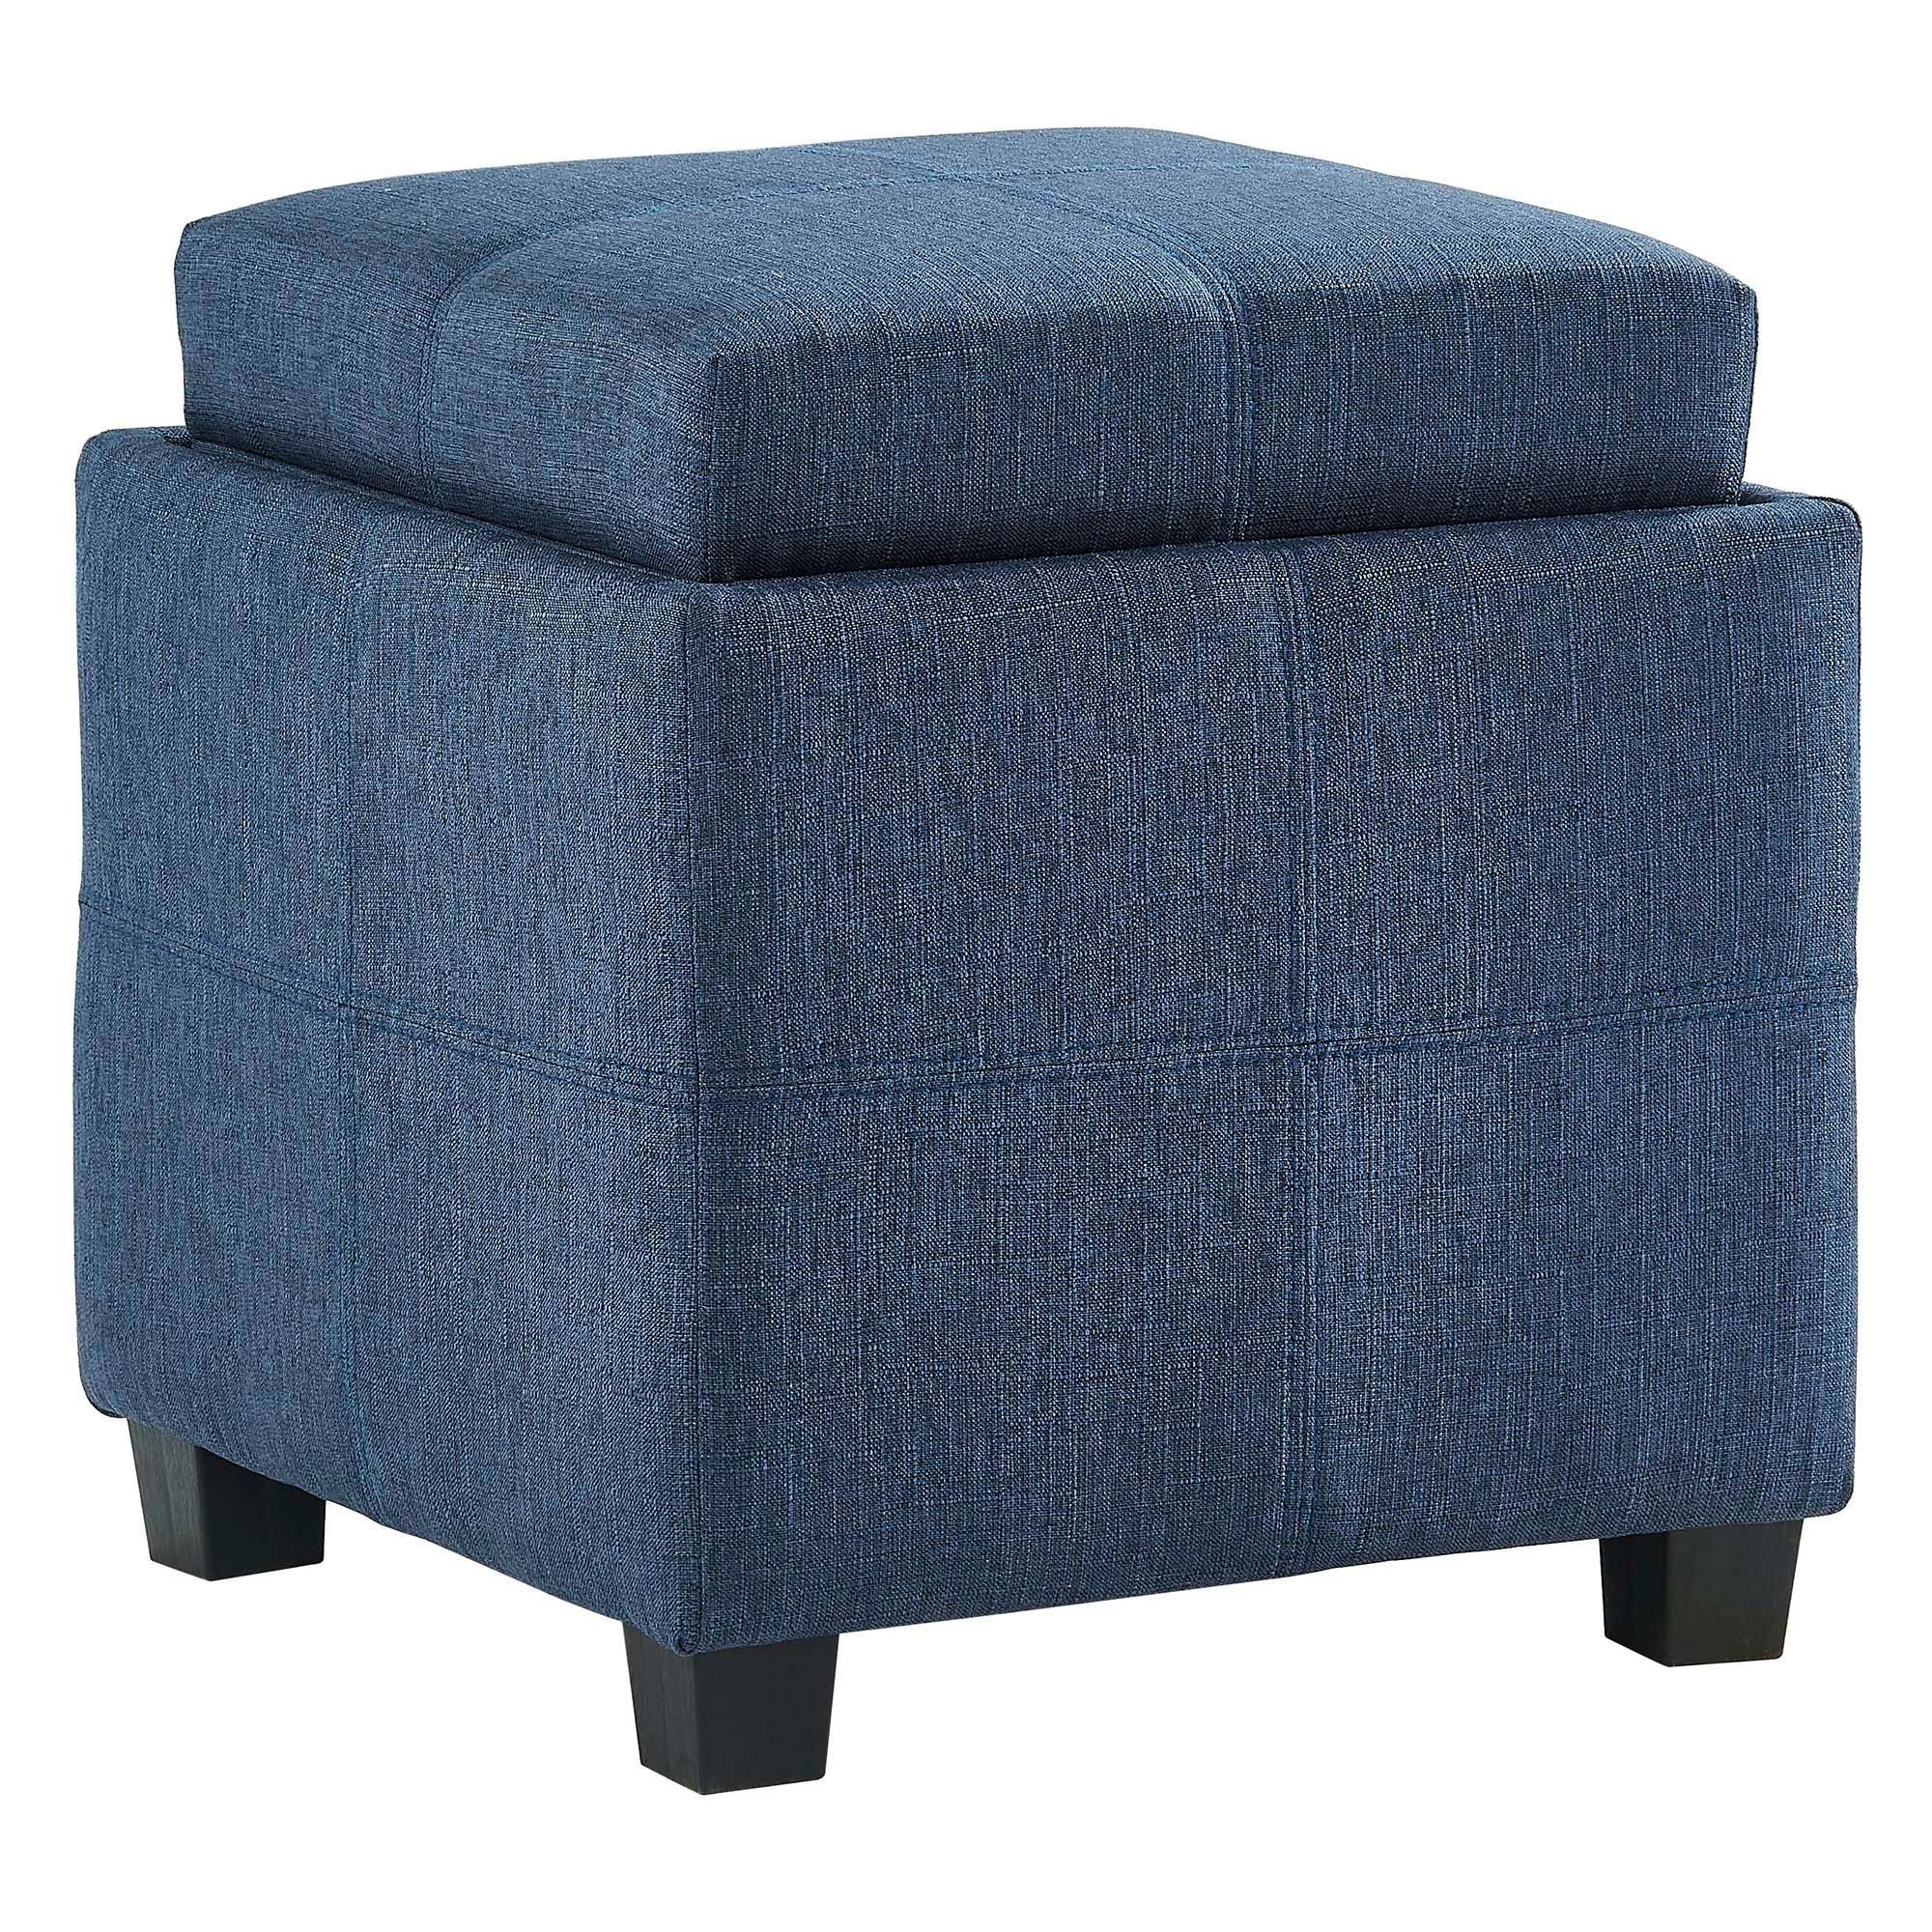 Preferred Blue Fabric Nesting Ottomans Set Of 2 In 19" Blue And Gray Transitional Square Storage Ottoman With Reversible (View 6 of 10)